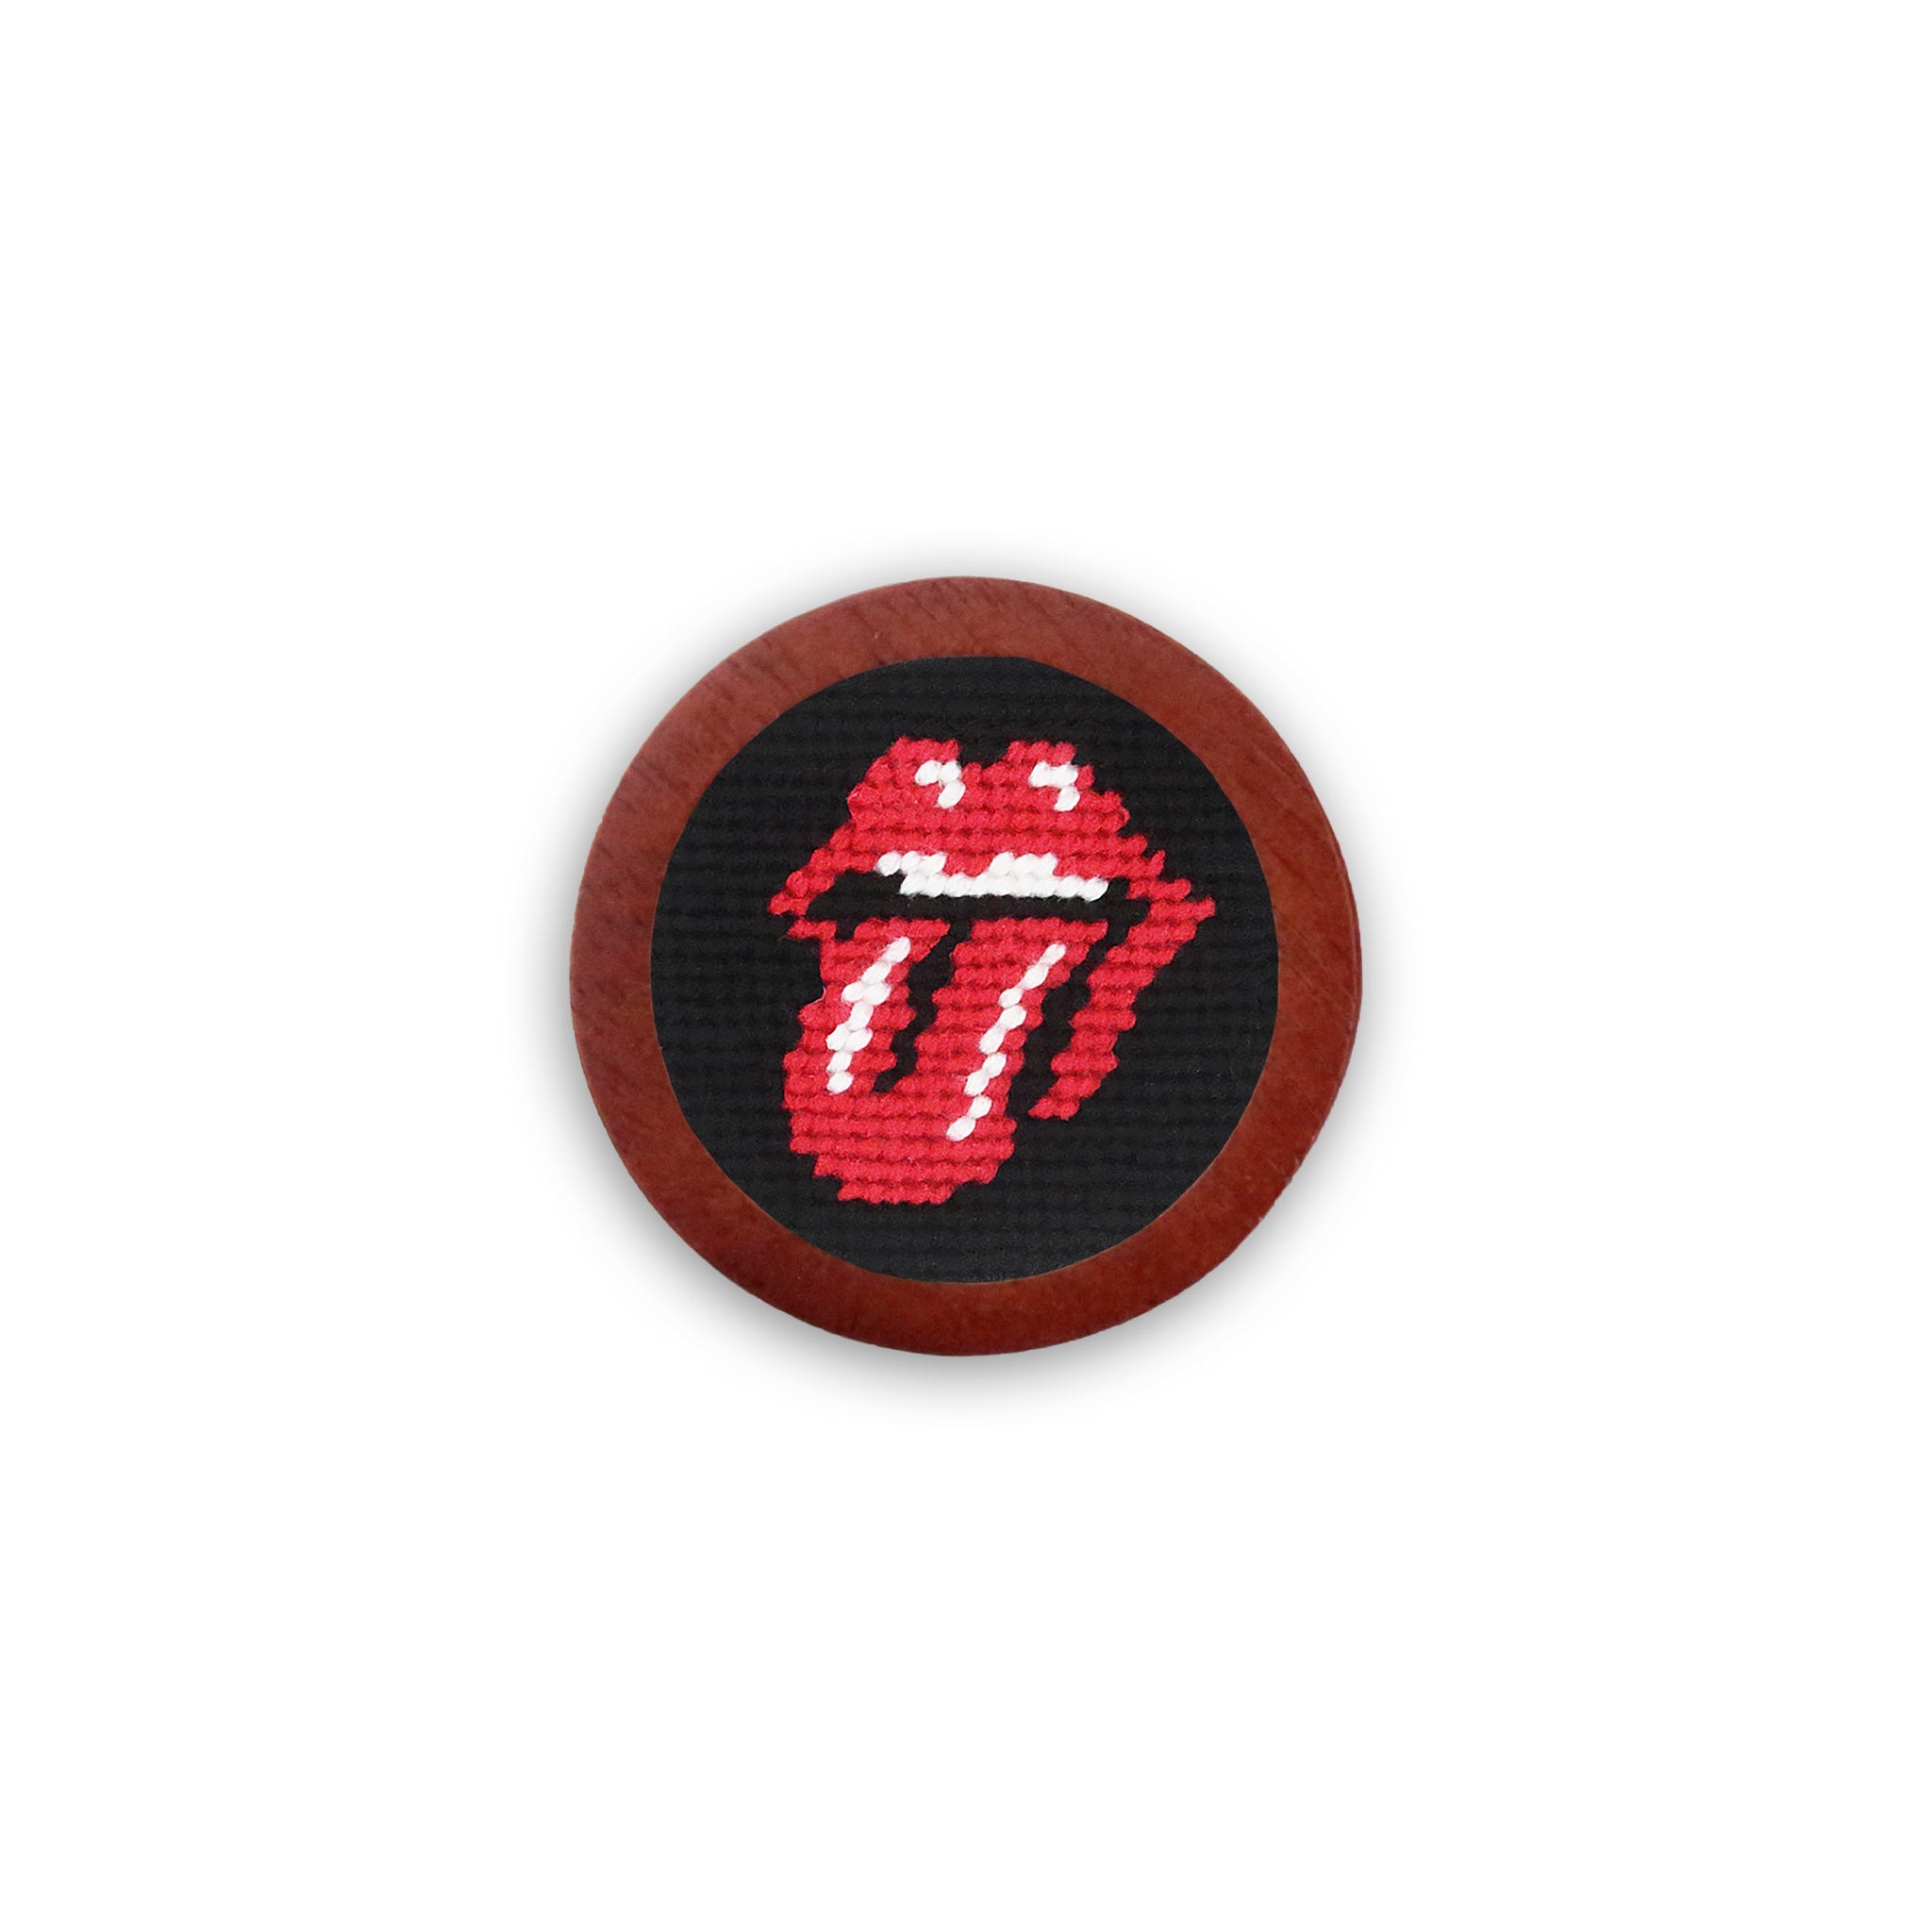 Smathers and Branson Rolling Stones Black Needlepoint Golf Ball Marker 